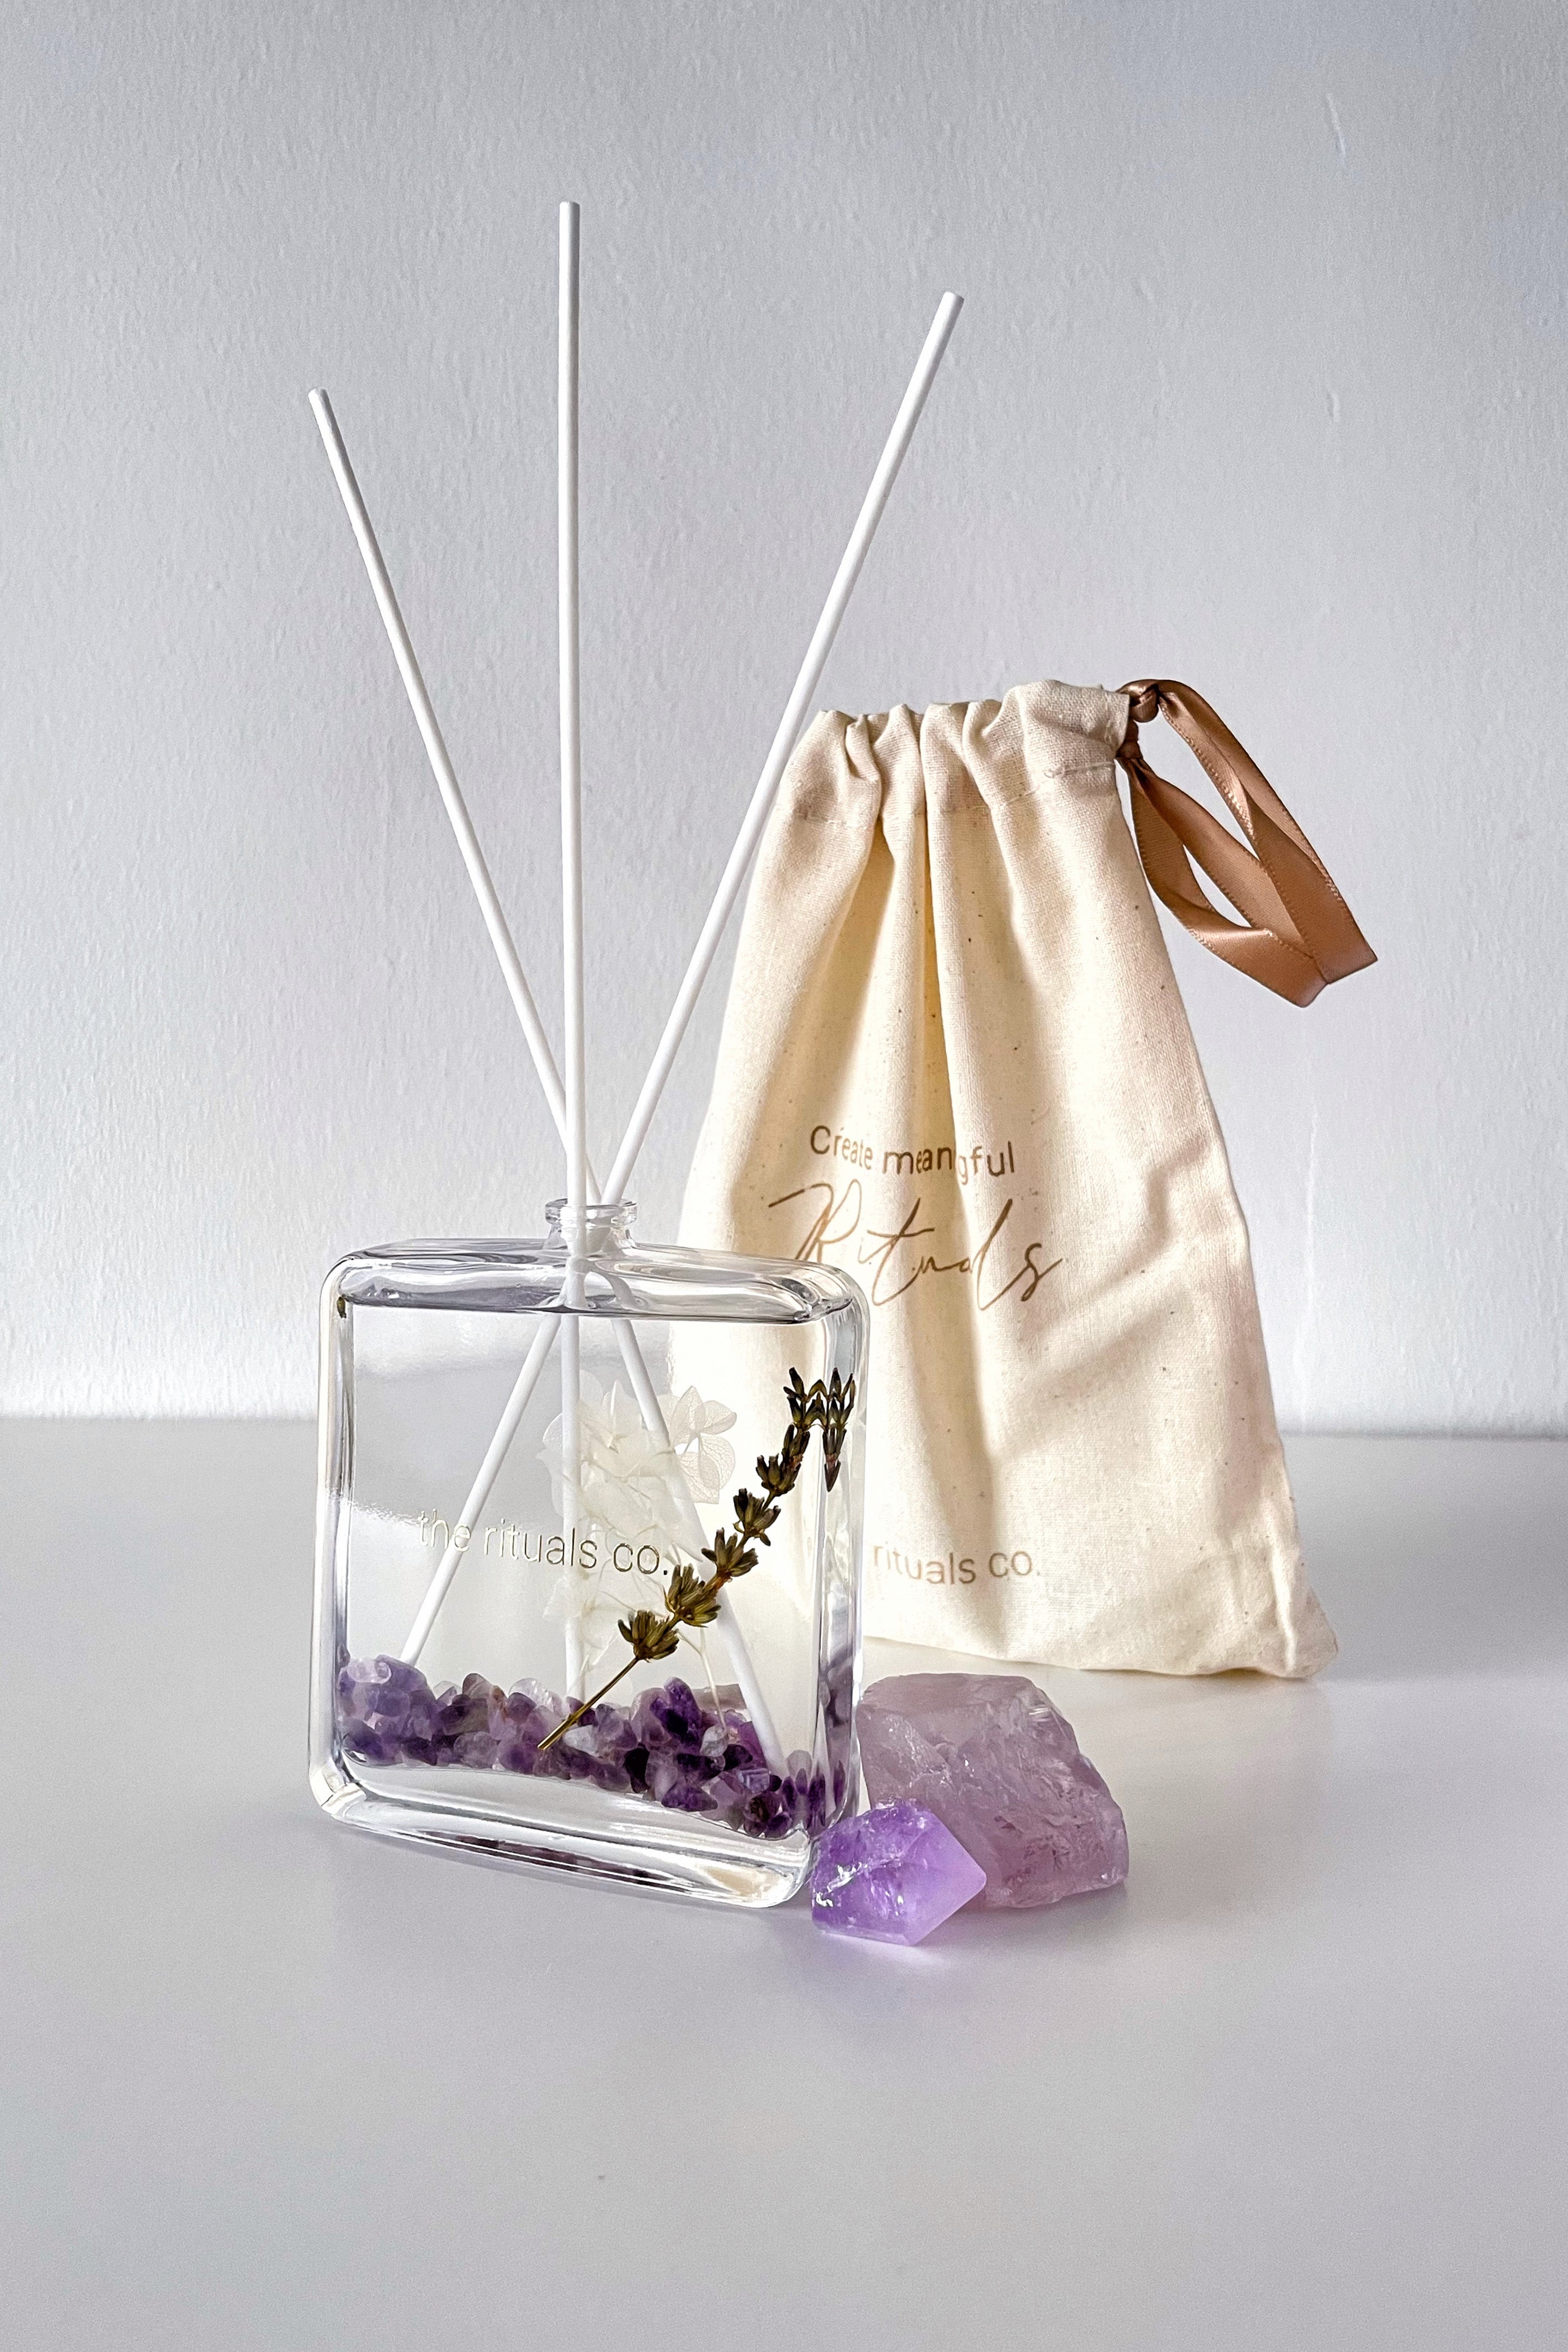 Rituals Co Crystal Reed Diffuser (Lavender White Tea)